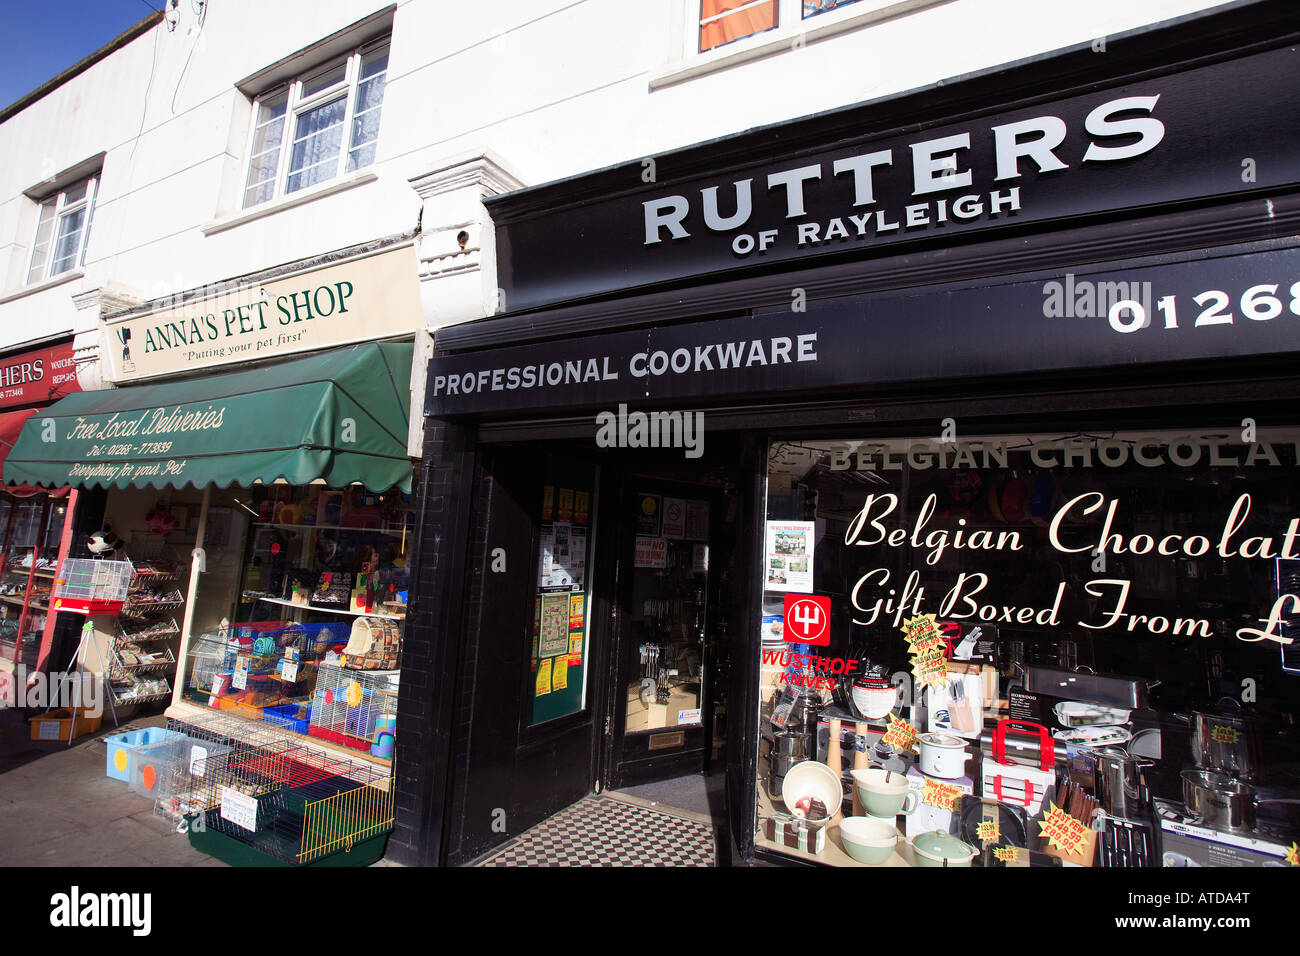 united kingdom essex rayleigh high street rutters professional cookware shop Stock Photo